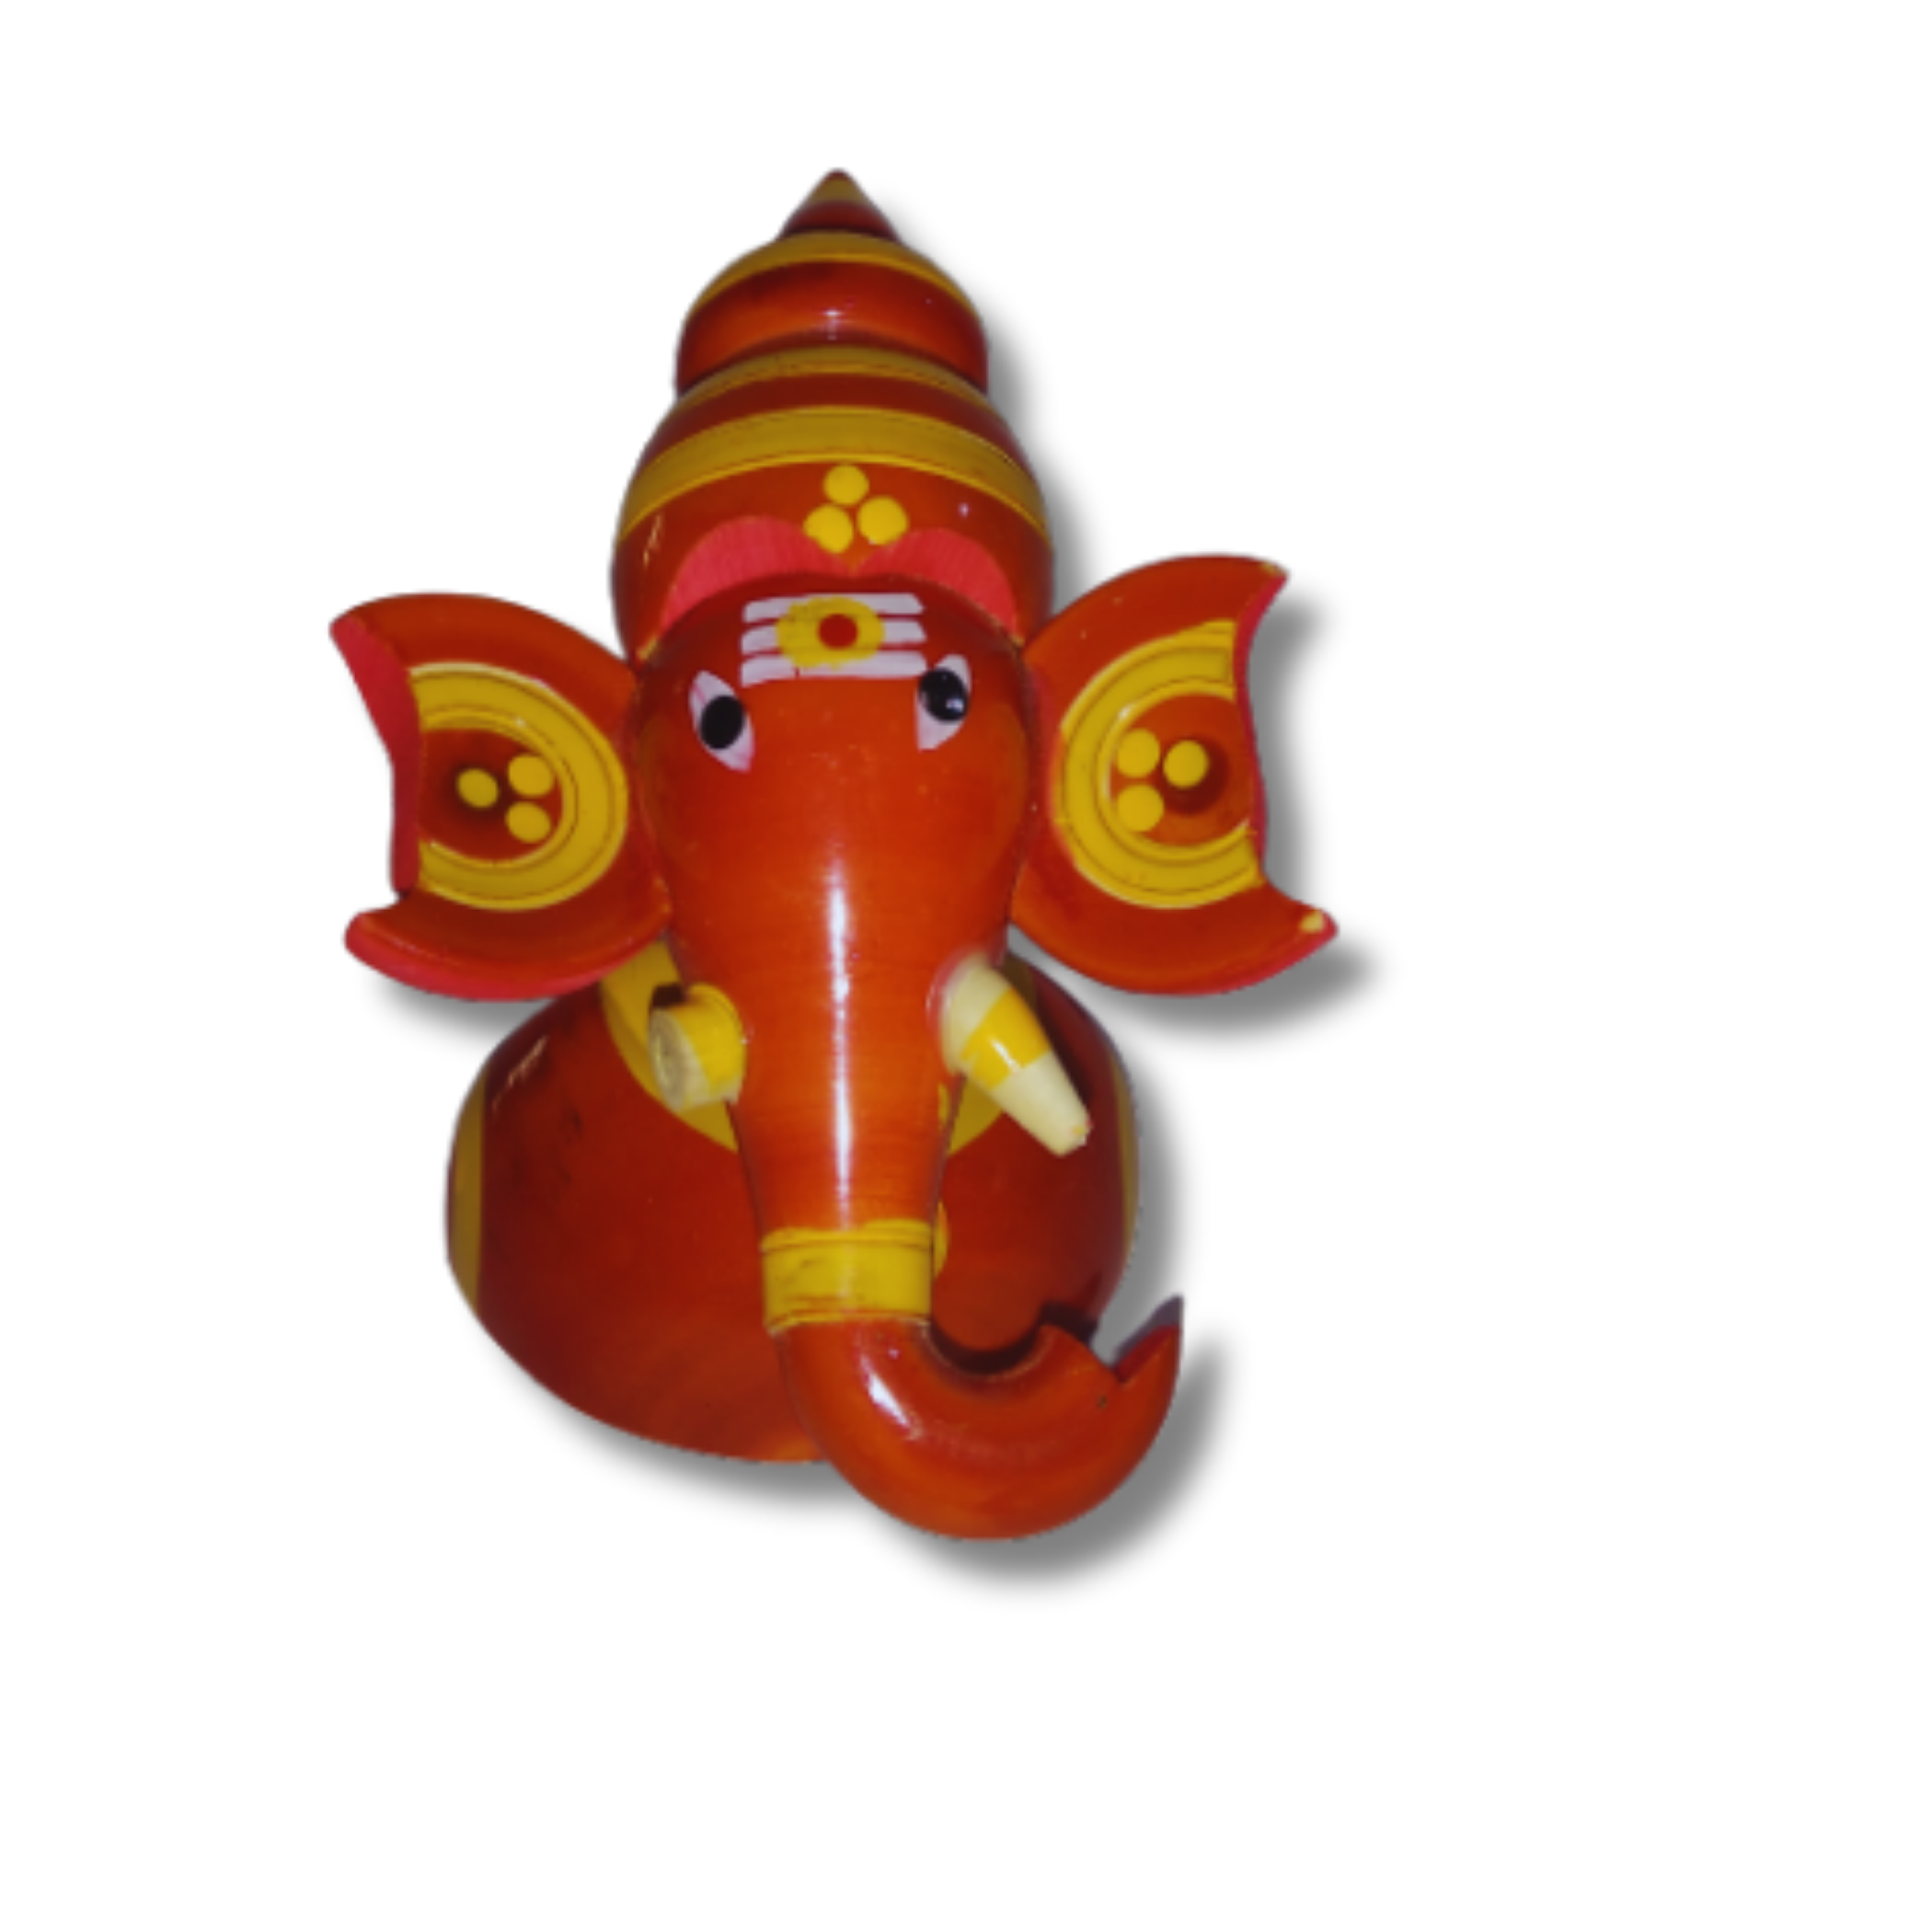 Authentic Etikoppaka Toys: Handcrafted Wooden Masterpieces for Play and Decor - Table Ganesh - Set of 3